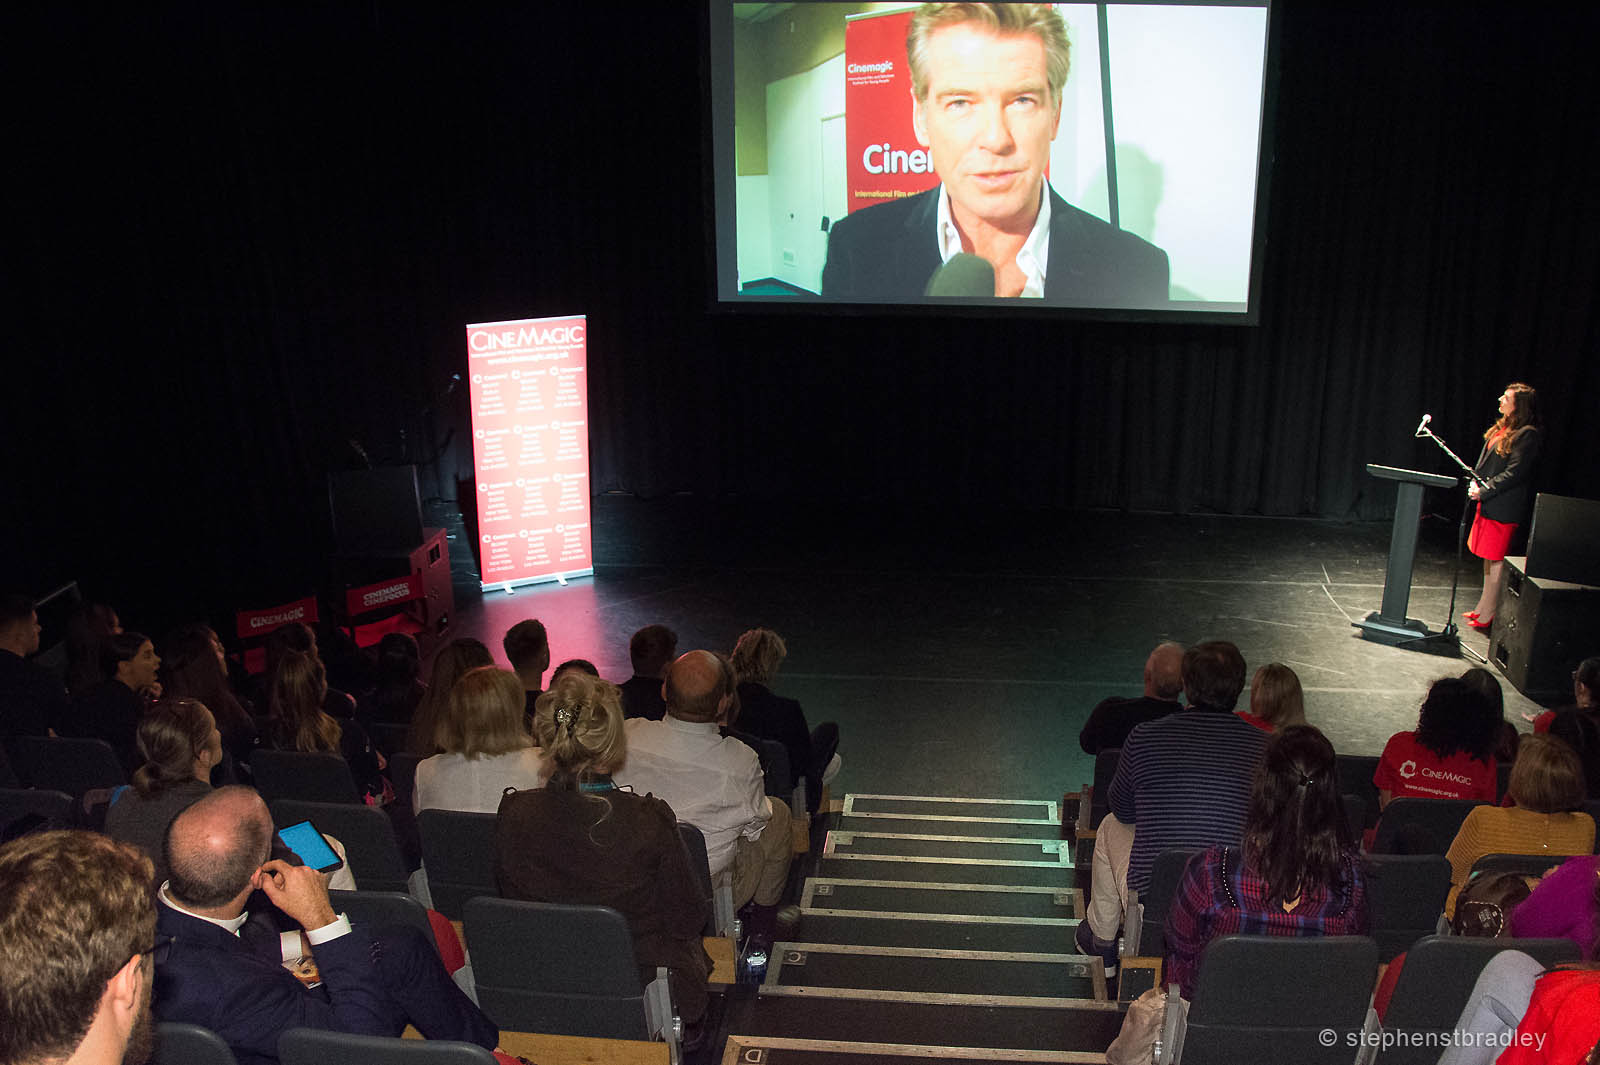 PR photography showing Pierce Brosnan video presentation and audience, photo 8247 - PR Photographer Dublin Ireland photo 8247 - PR photo by Stephen S T Bradley, commercial, advertising, social media, editorial, annual report, PR photographer Dublin, Ireland